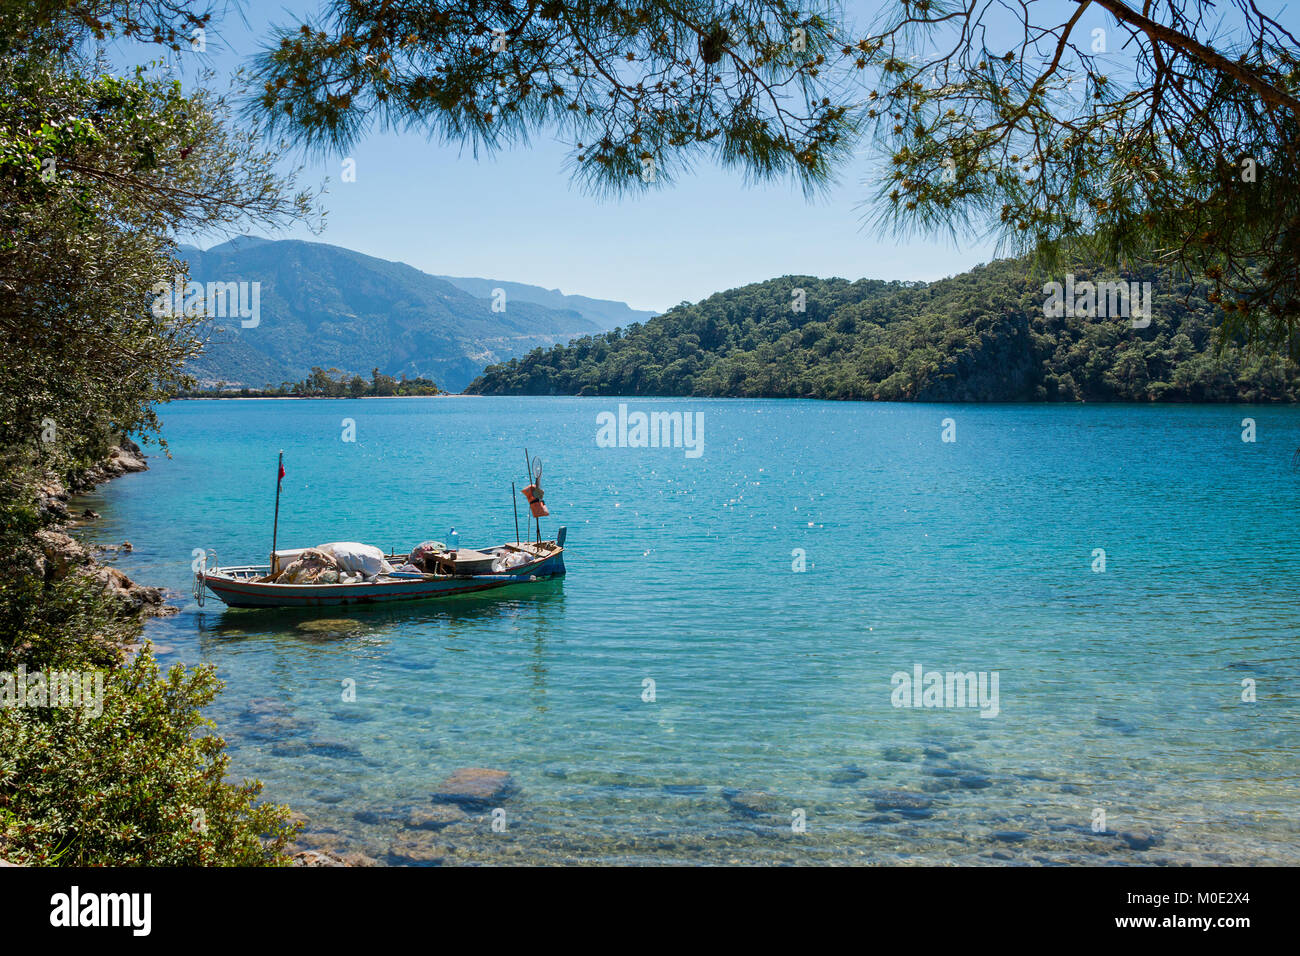 Turkish coastline with turquoise color water of the Aegean Sea, in Oludeniz, Fethiye, Turkey Stock Photo